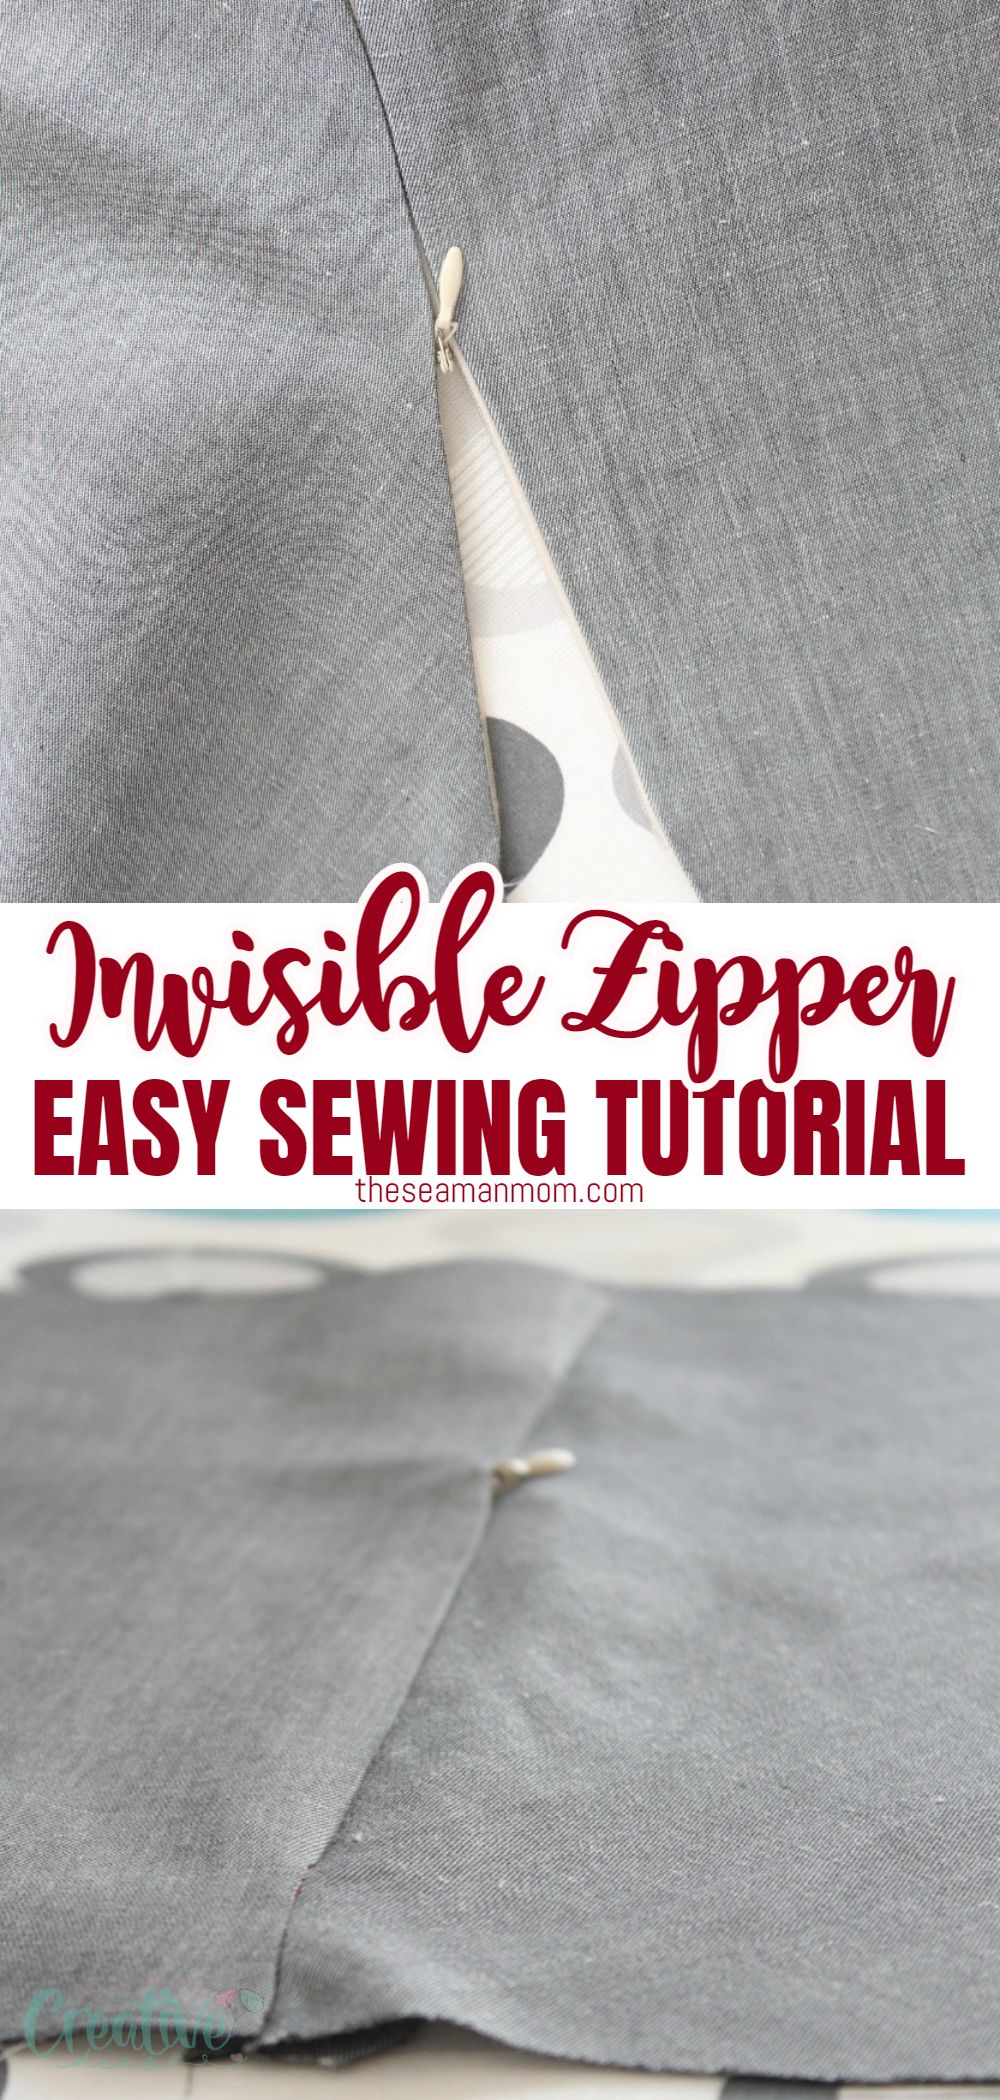 Does your project require sewing an invisible zipper? No need to feel intimidated by zippers! Here you'll learn the best and easiest way to sew one! via @petroneagu